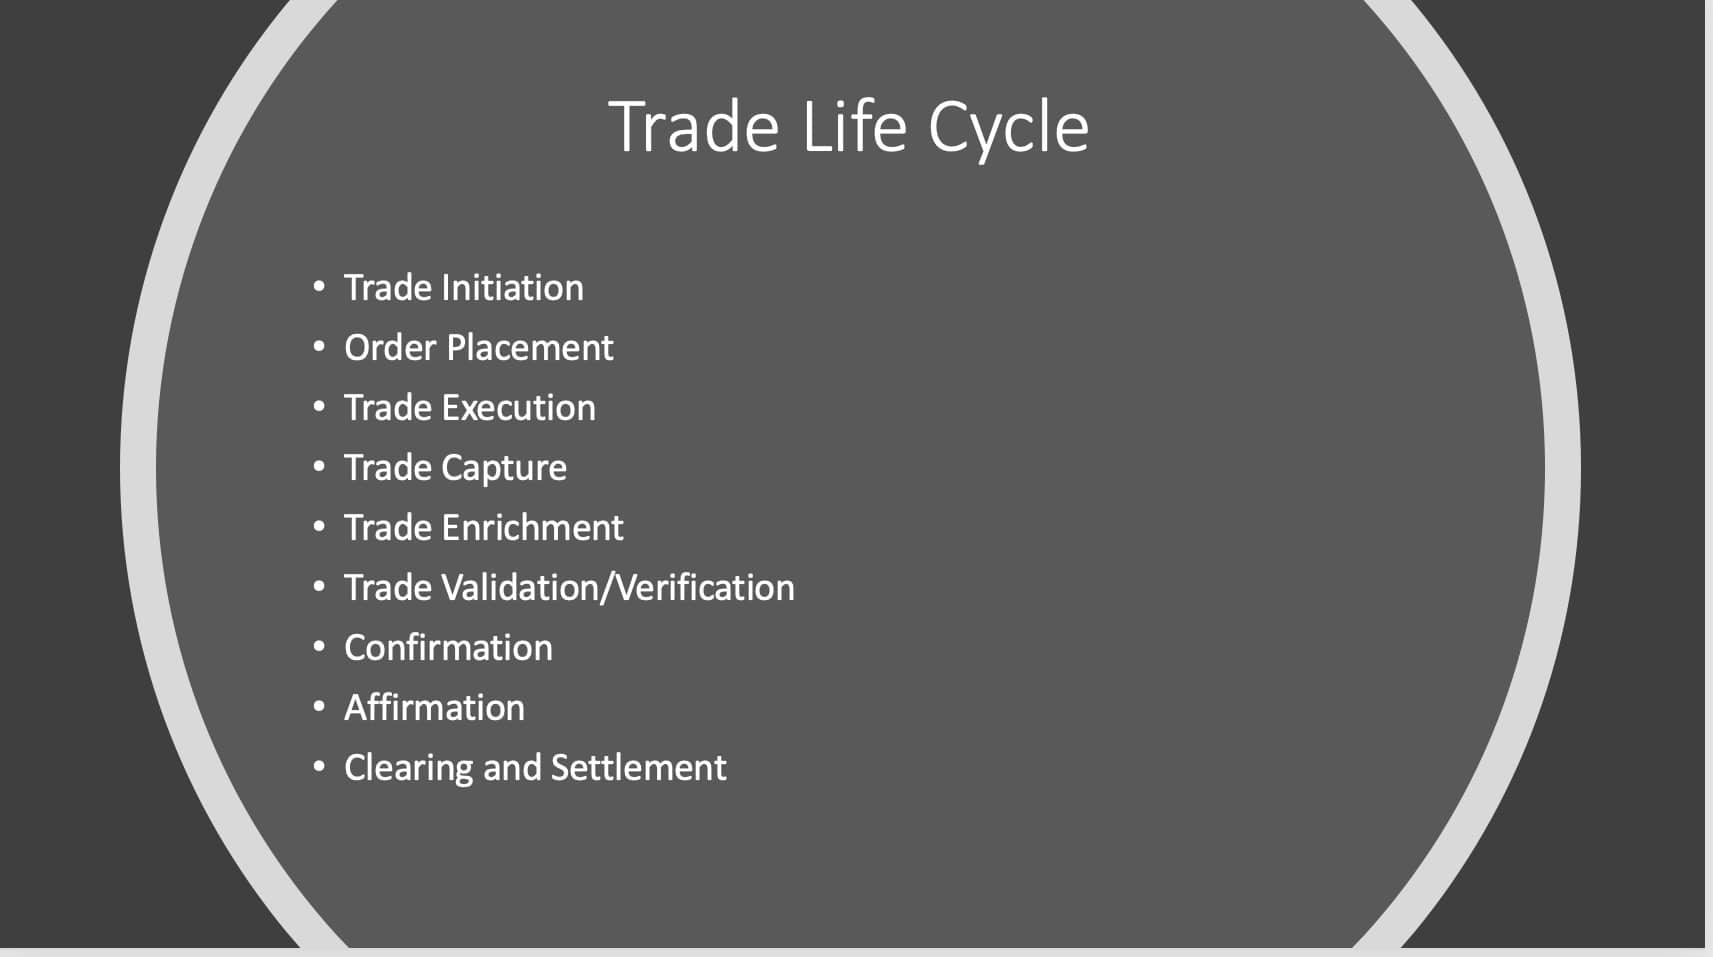 Trade Life Cycle of Equities | Finex Training